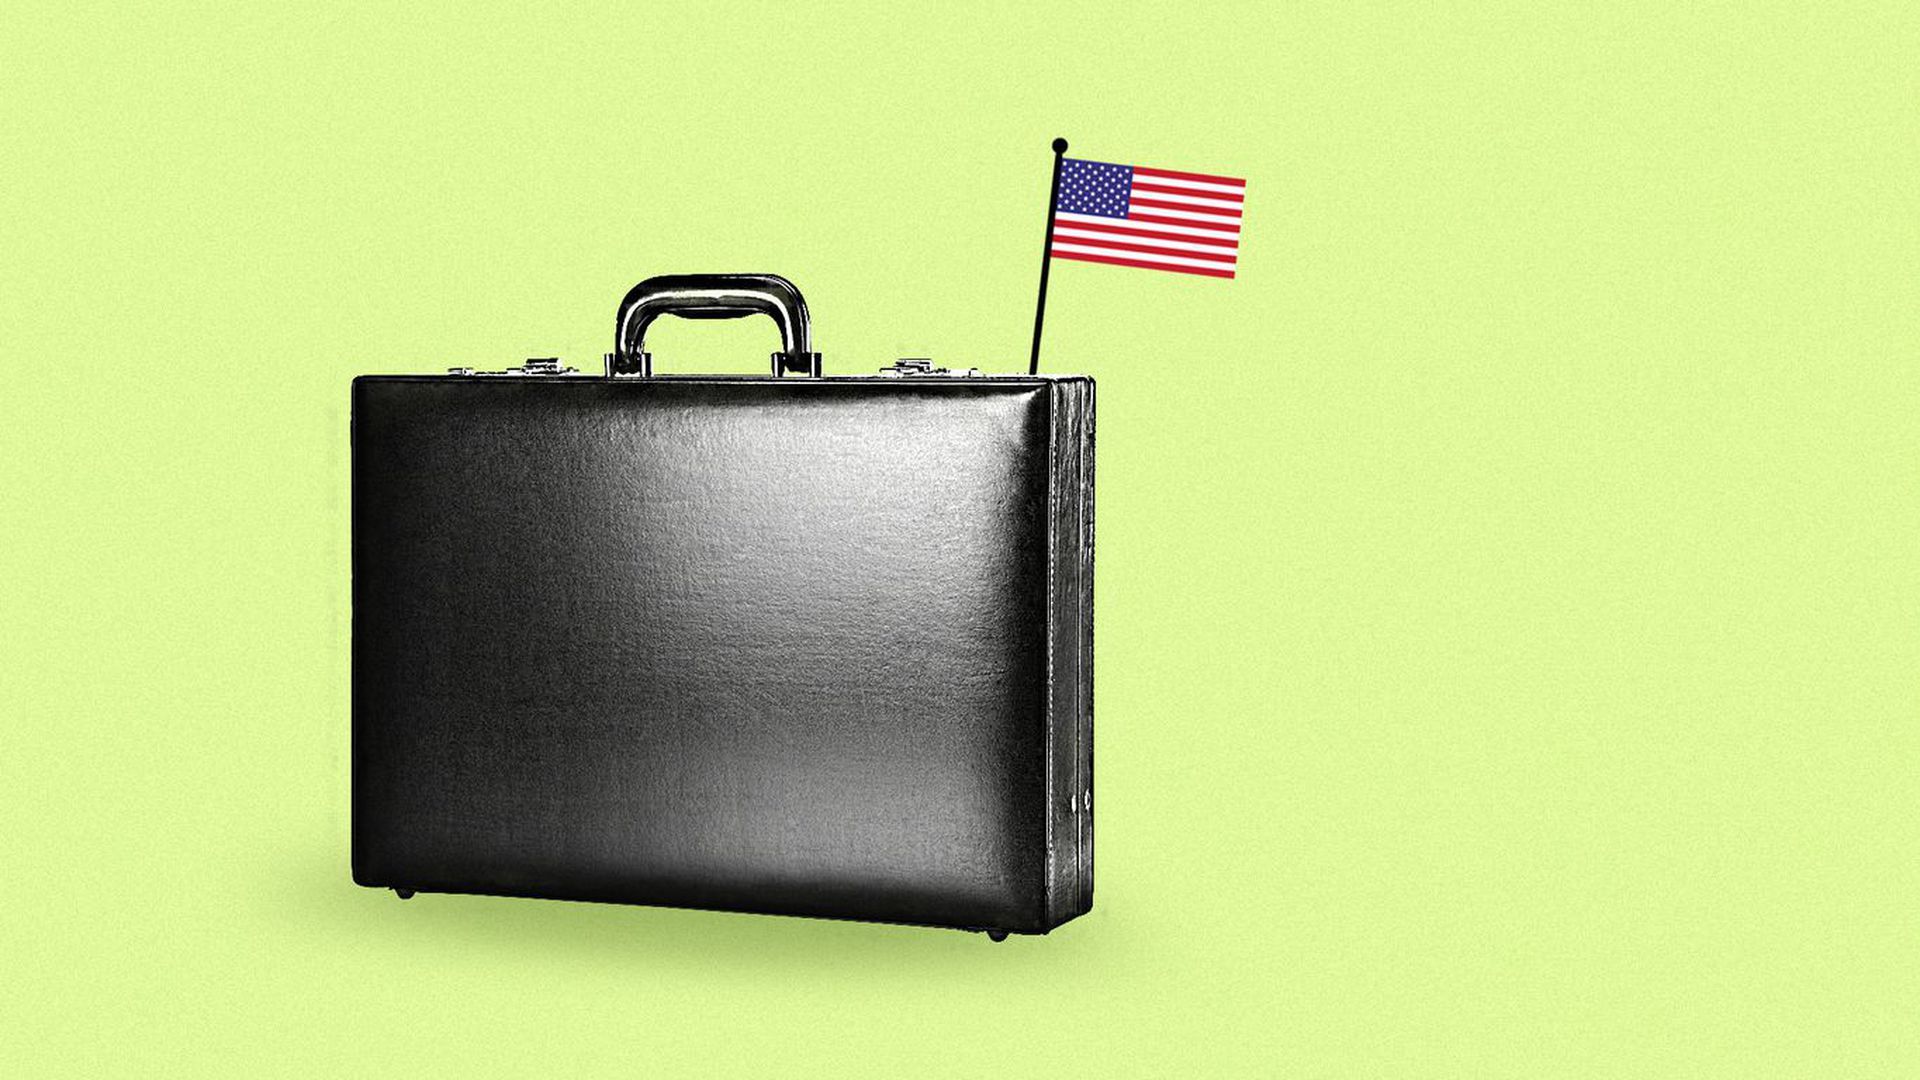 Illustration of a briefcase with an American flag in it